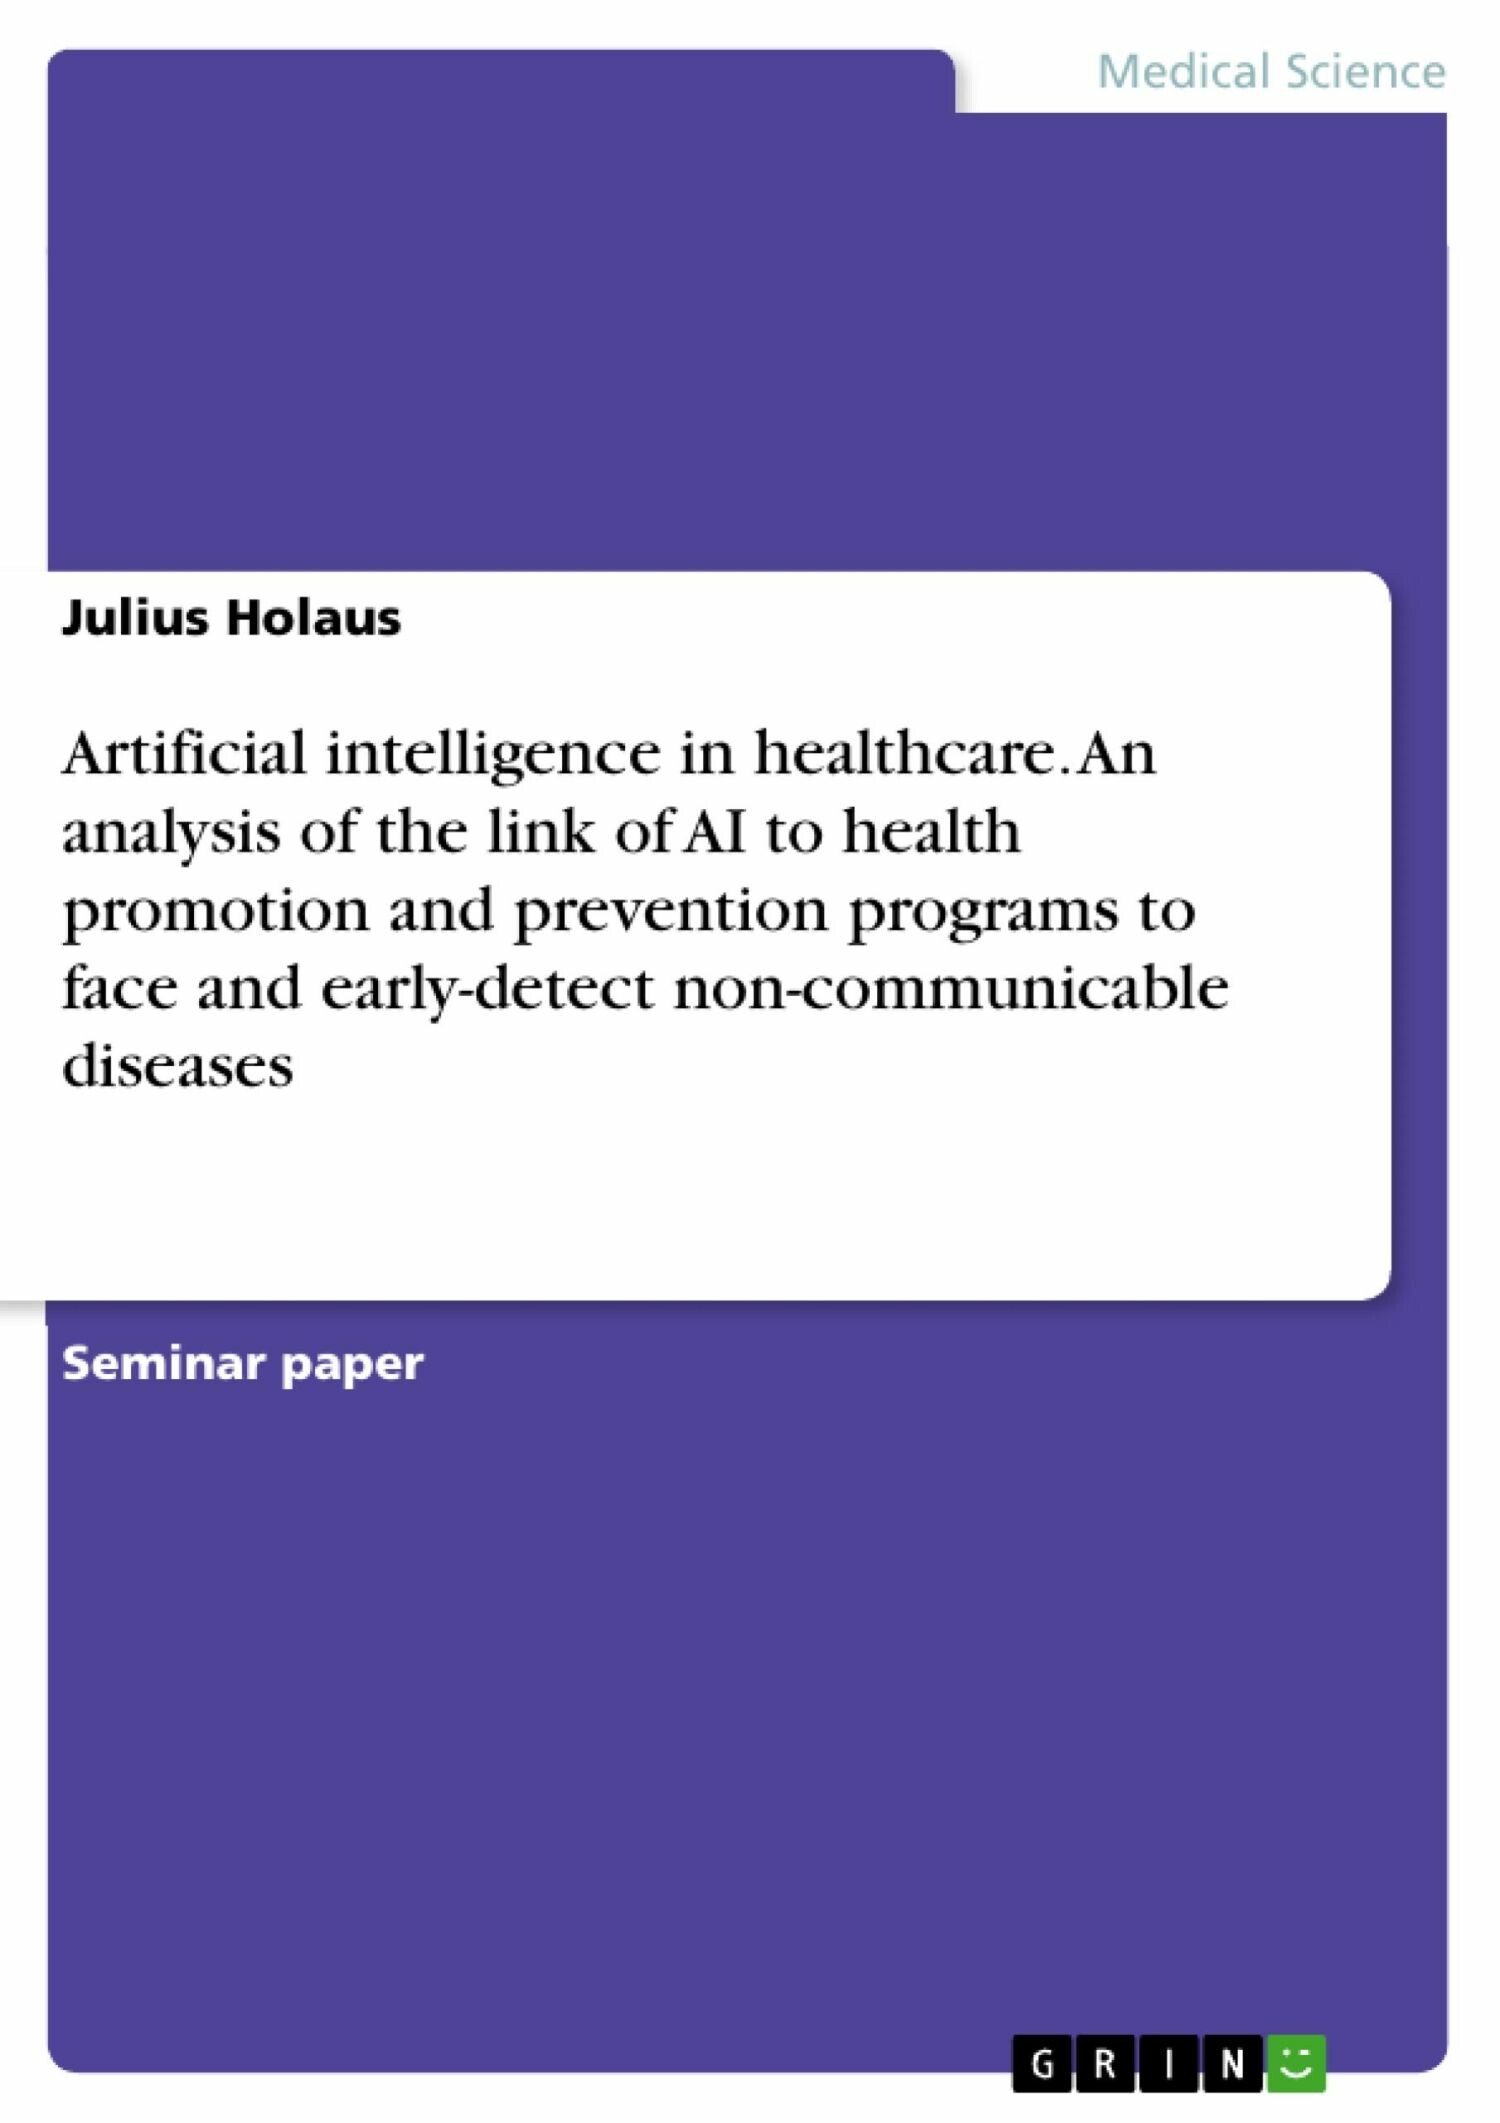 Artificial intelligence in healthcare. An analysis of the link of AI to health promotion and prevention programs to face and early-detect non-communicable diseases